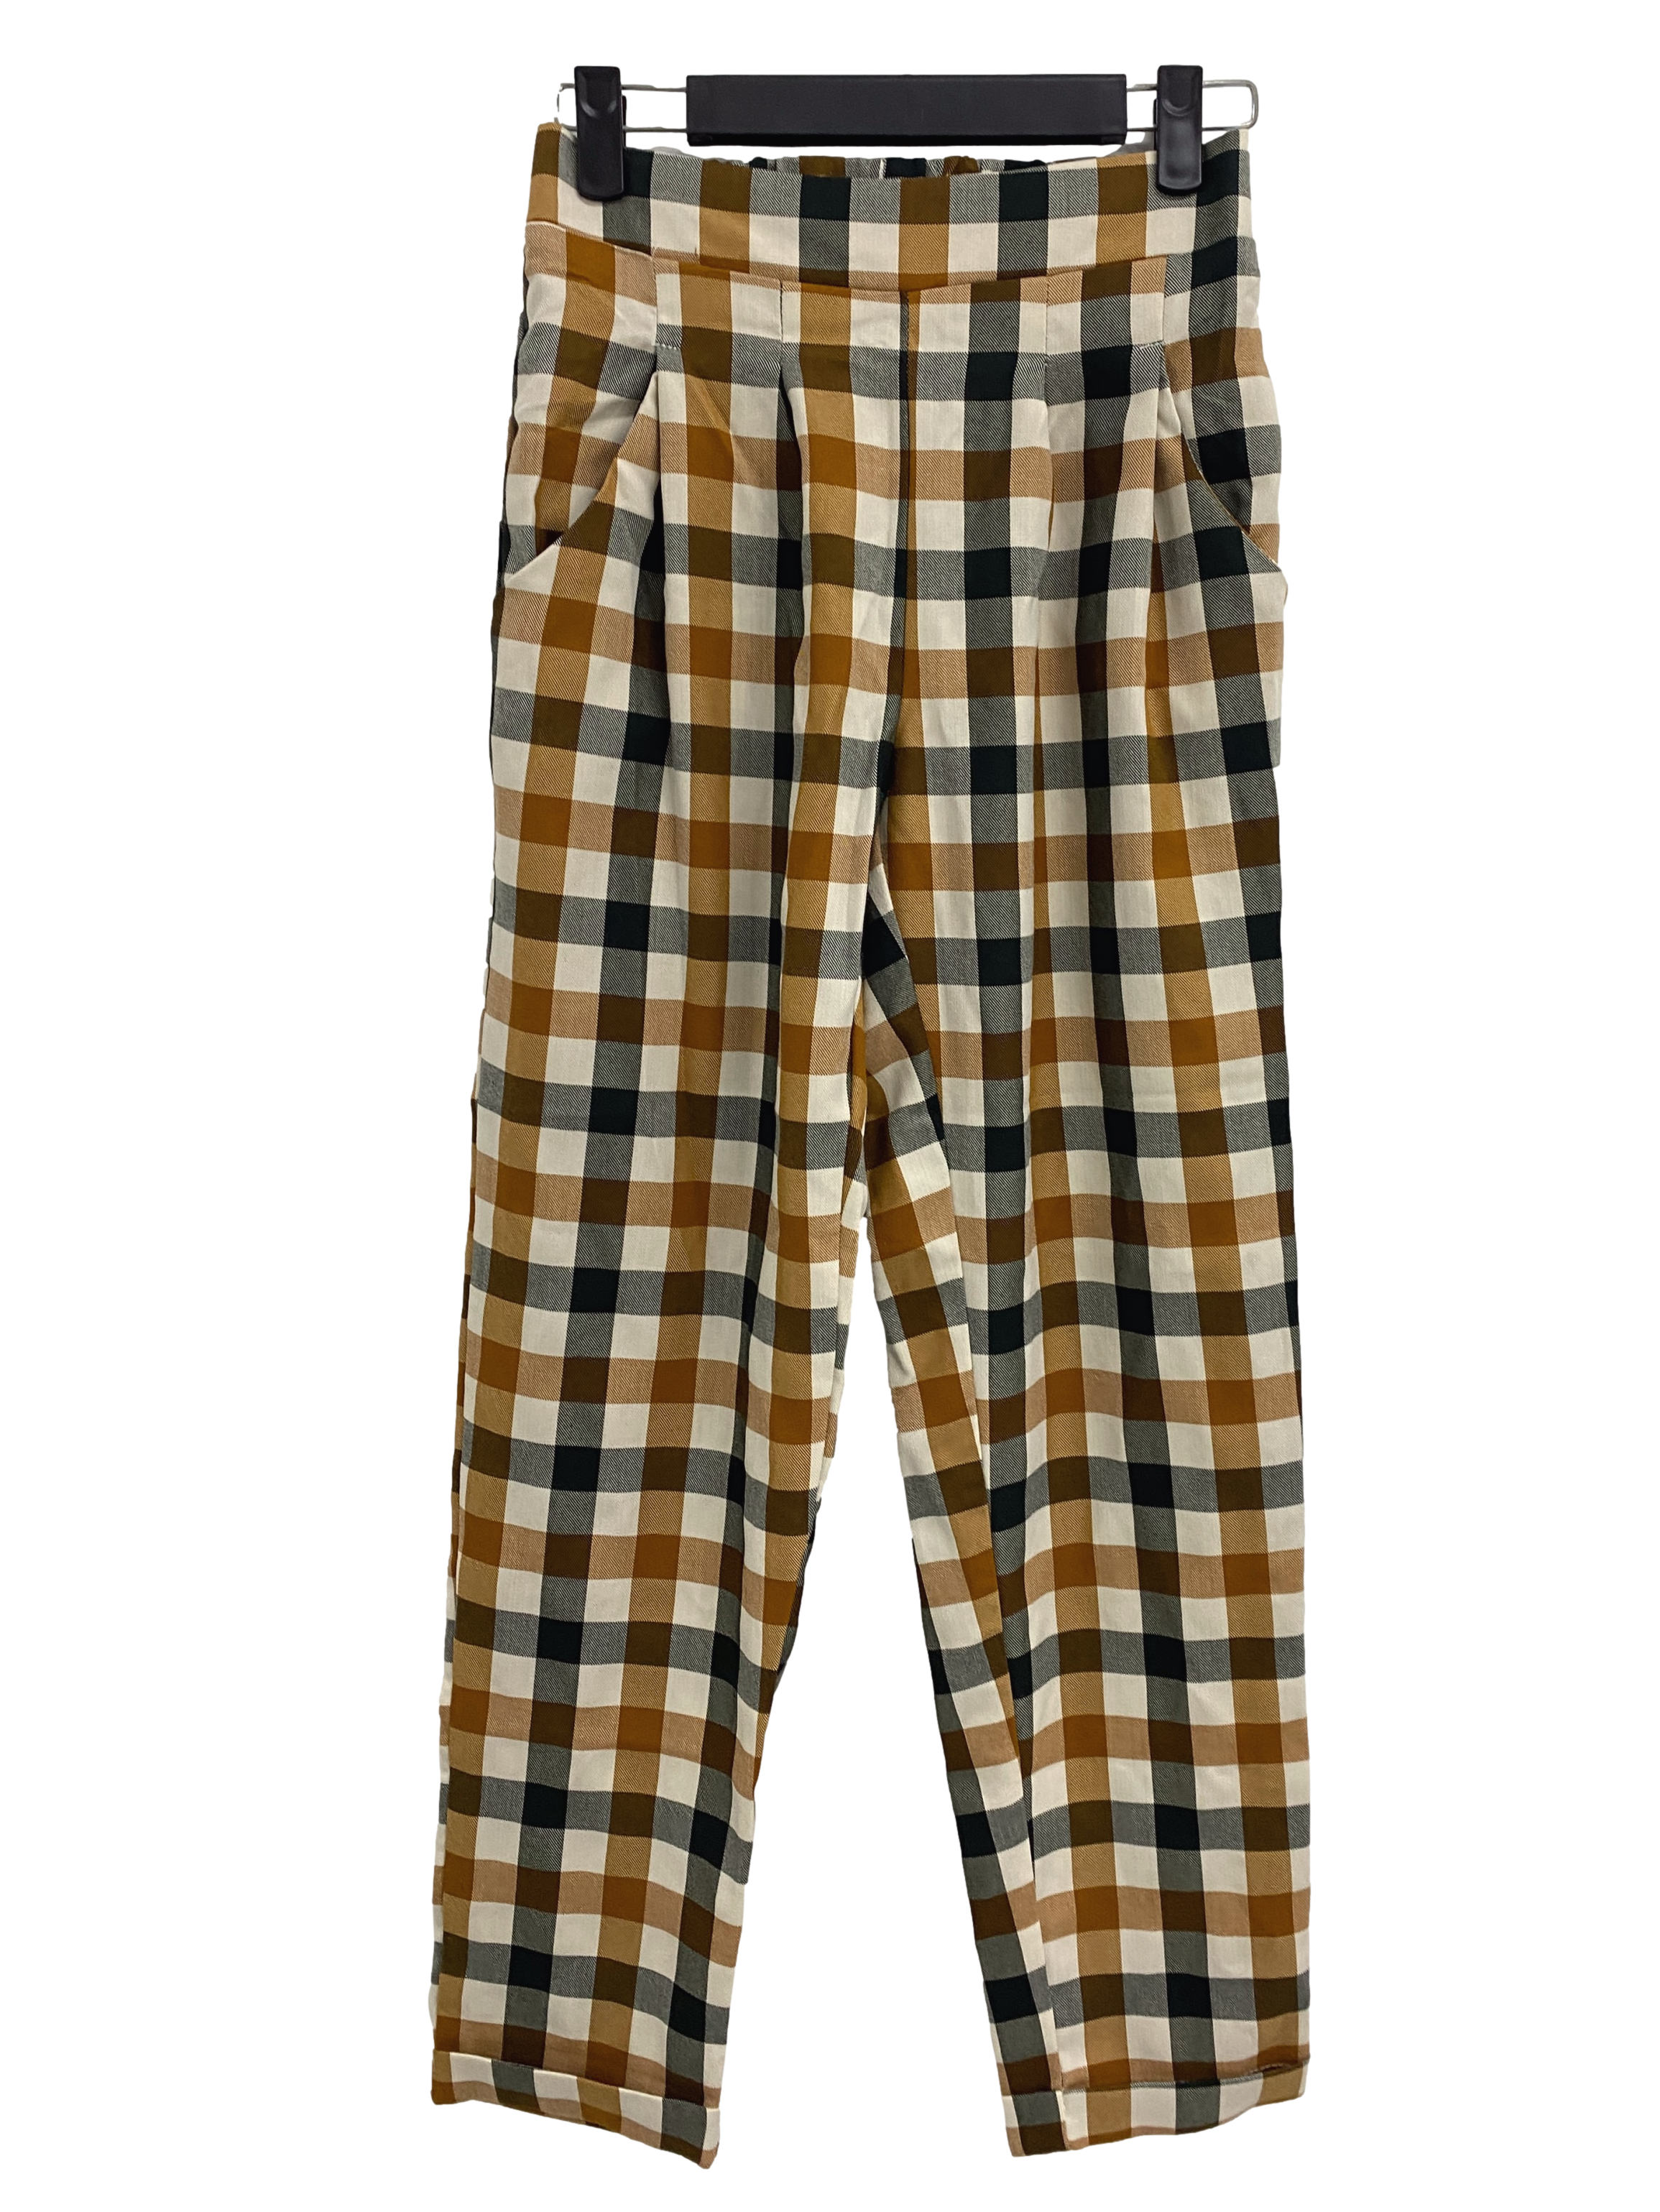 Multicolour Checkered Rolled Hem Pants